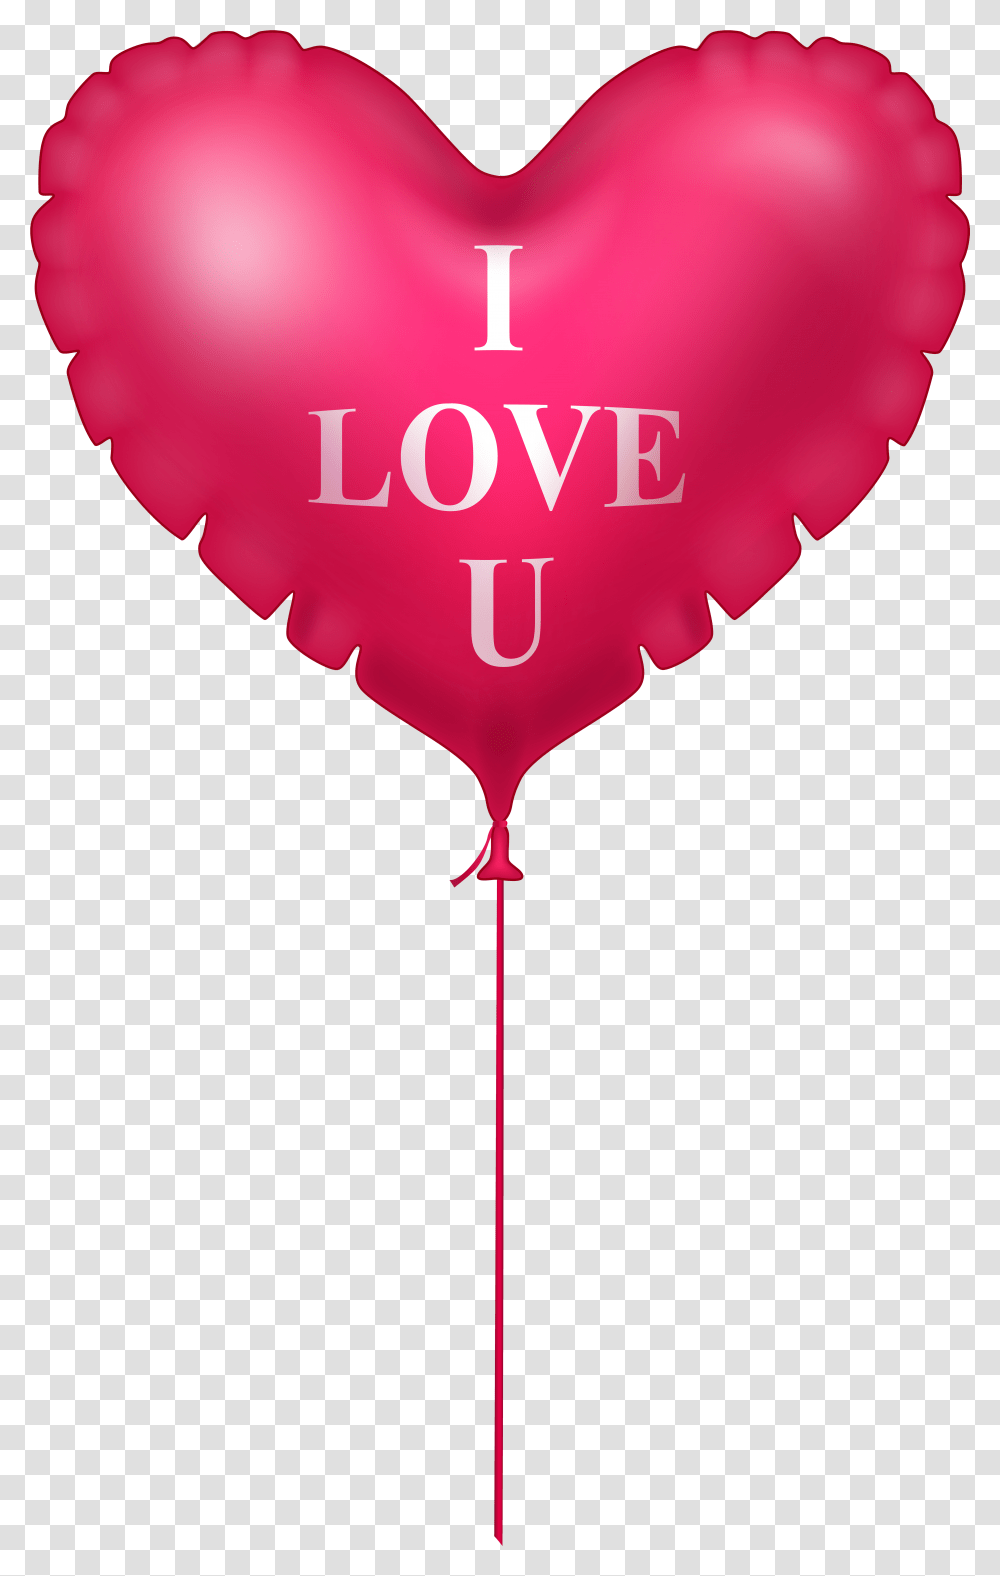 I Love You Pink Heart Balloon Image Love Heart Balloon Transparent Png